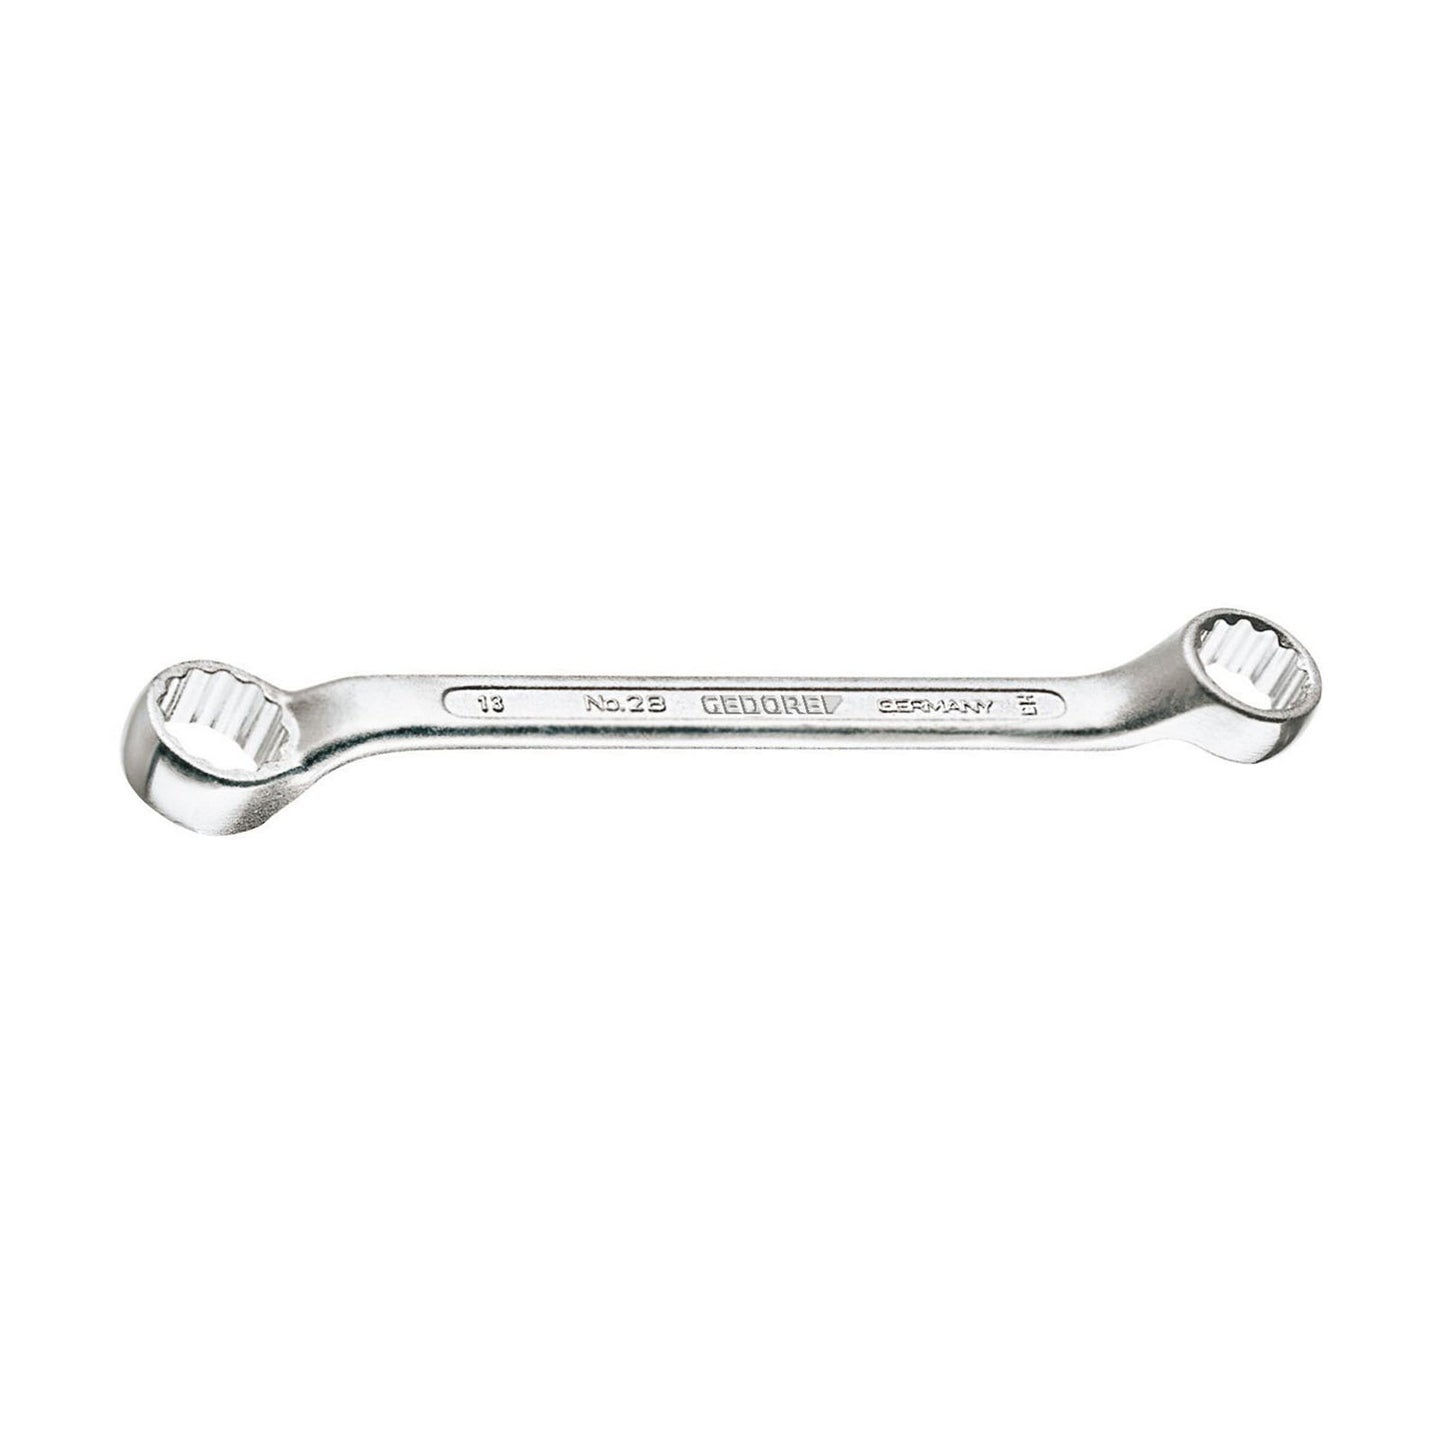 GEDORE 2 B 8X9 - Short Elbow Star Wrench, 8x9 (6051230)